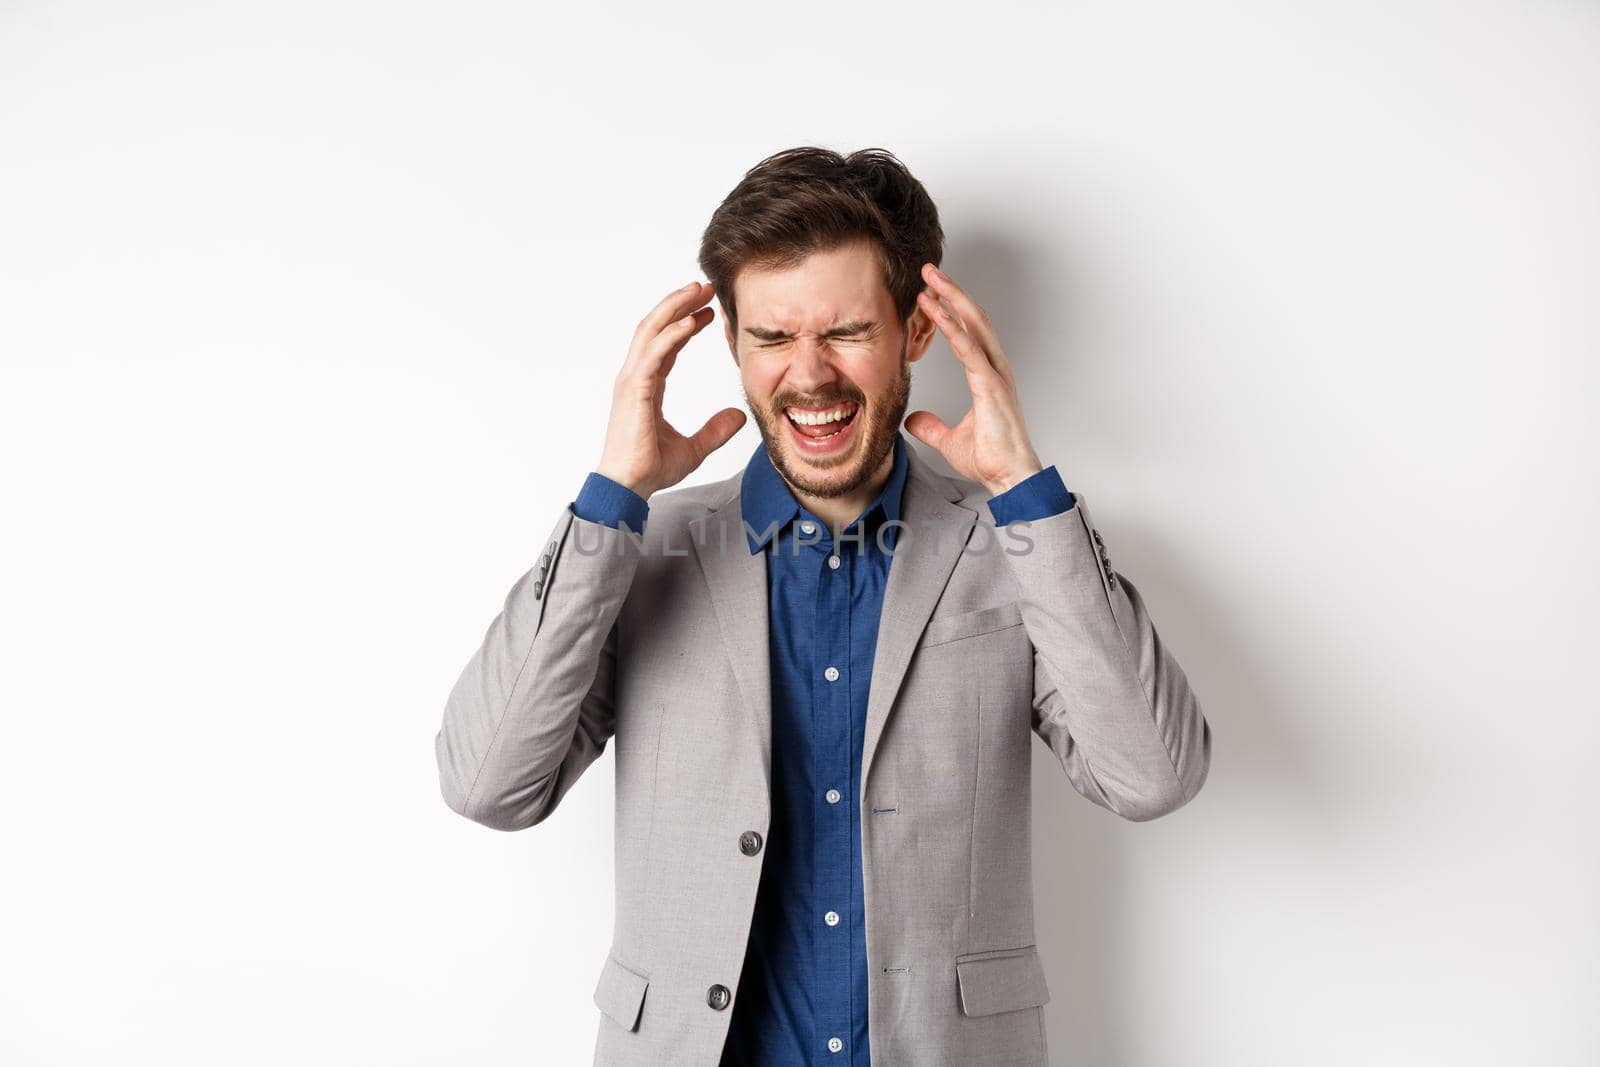 Frustrated business man in suit going crazy, screaming and shaking hands near head, feeling annoyed or angry, shouting distressed, standing on white background.